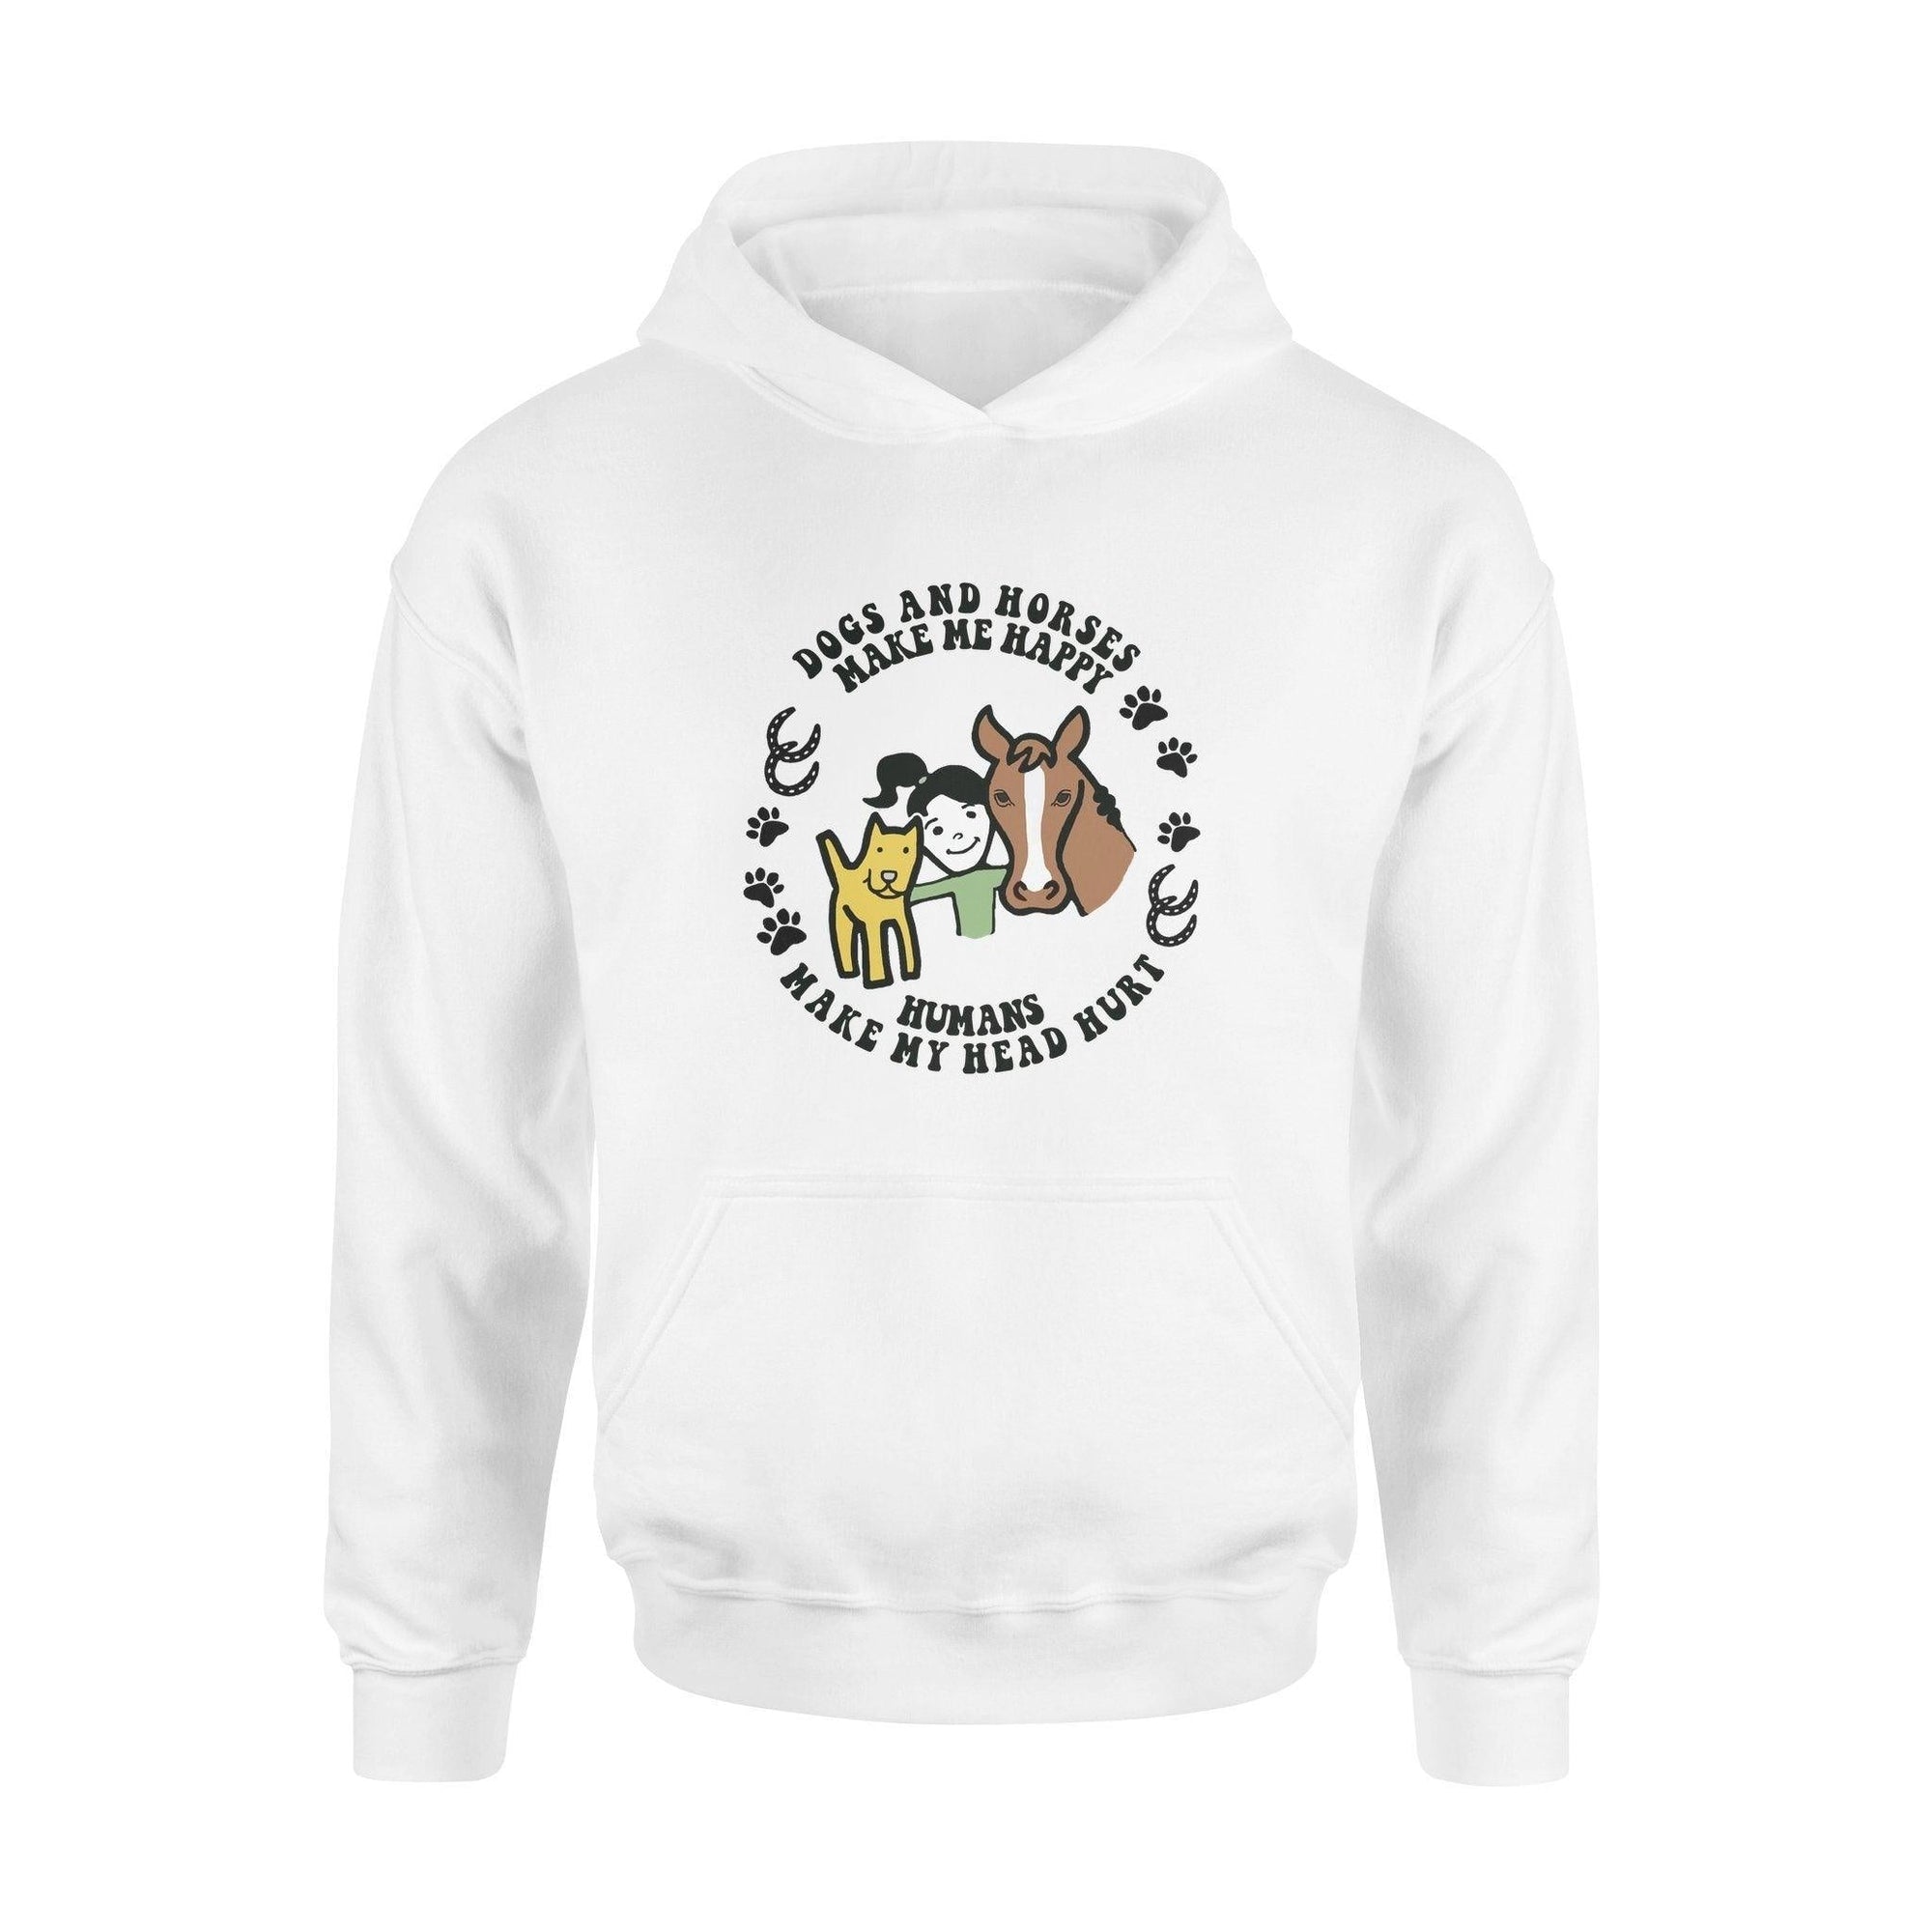 Dog, Horse Dog and Horse - Standard Hoodie - PERSONAL84